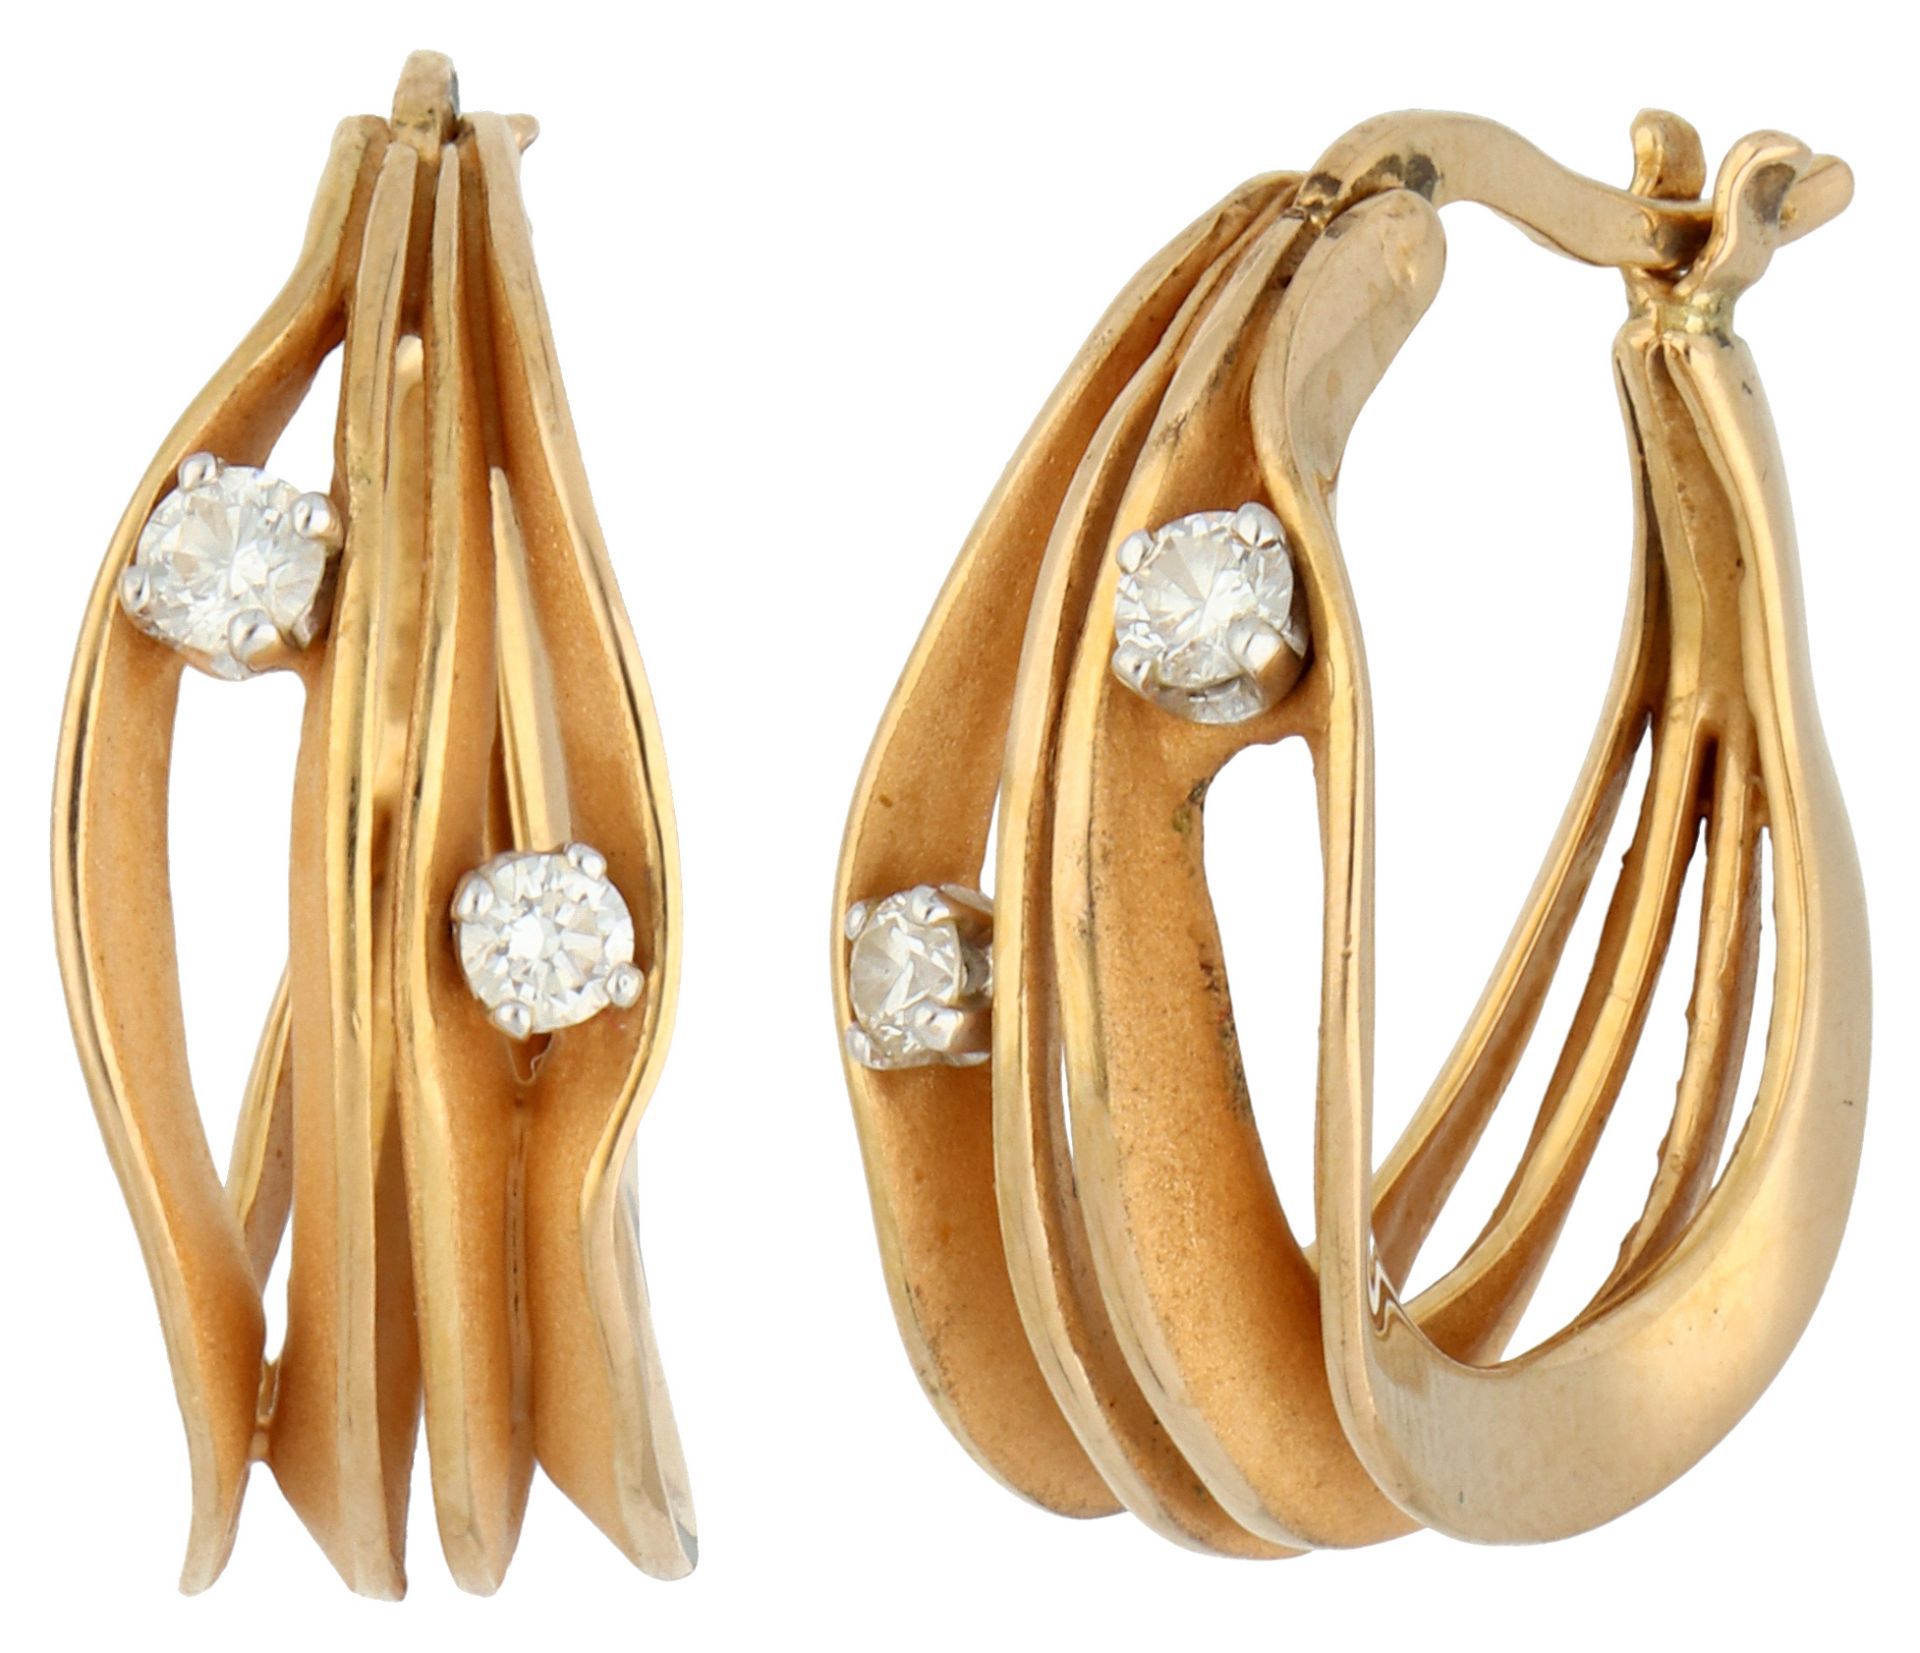 No Reserve - Annamaria Cammilli 18K yellow gold hoop earrings set with approx. 0.32 ct. diamonds.